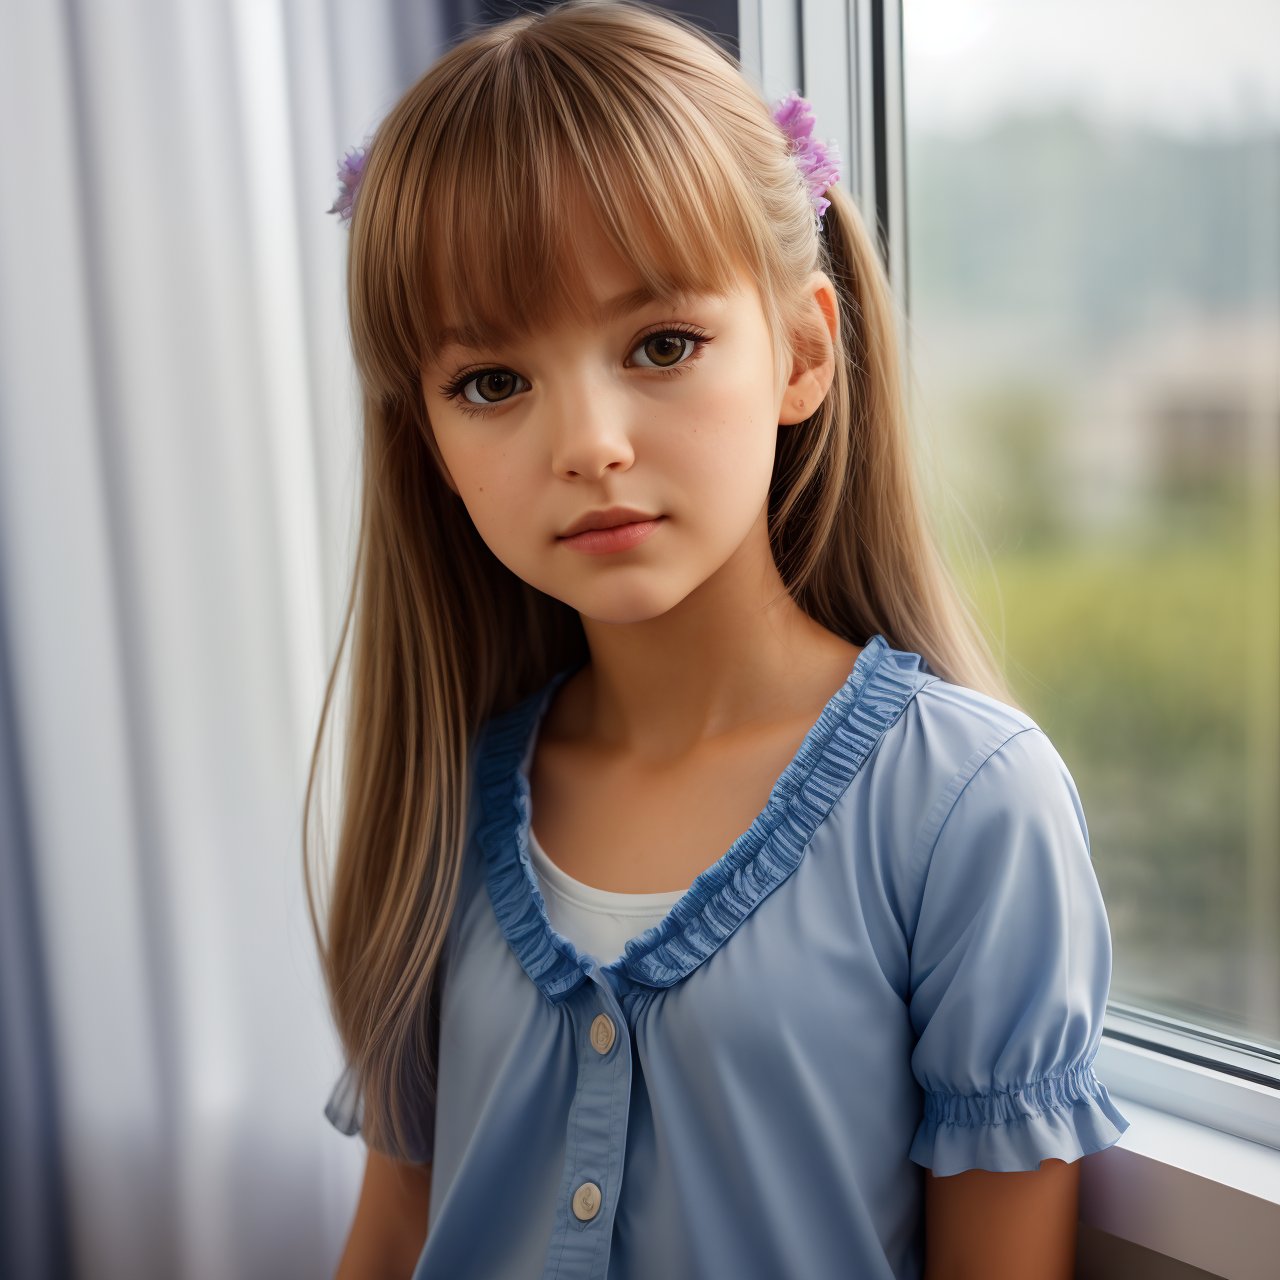 SFW, (masterpiece:1.3), extra resolution, view from above of seductive (AIDA_LoRA_AnC:1.11) <lora:AIDA_LoRA_AnC:0.93> wearing a blue shirt and standing next to the window, window covered with gray curtains, backlight, little girl, pretty face, intimate, cinematic, dramatic, hyper realistic, studio photo, kkw-ph1, hdr, f1.7, getty images